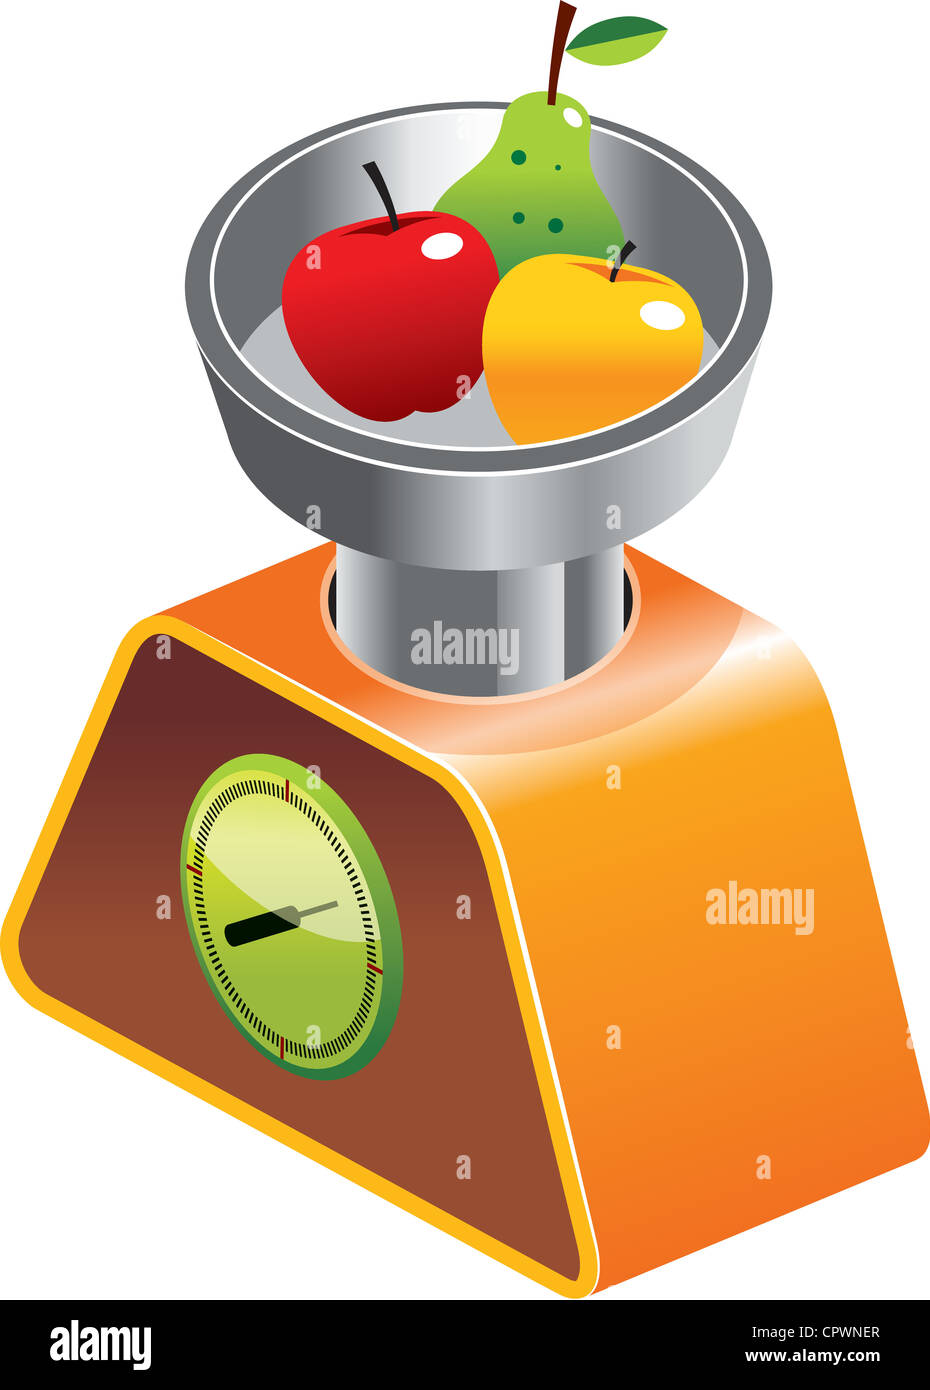 https://c8.alamy.com/comp/CPWNER/a-weigh-scale-with-apples-and-a-pear-CPWNER.jpg